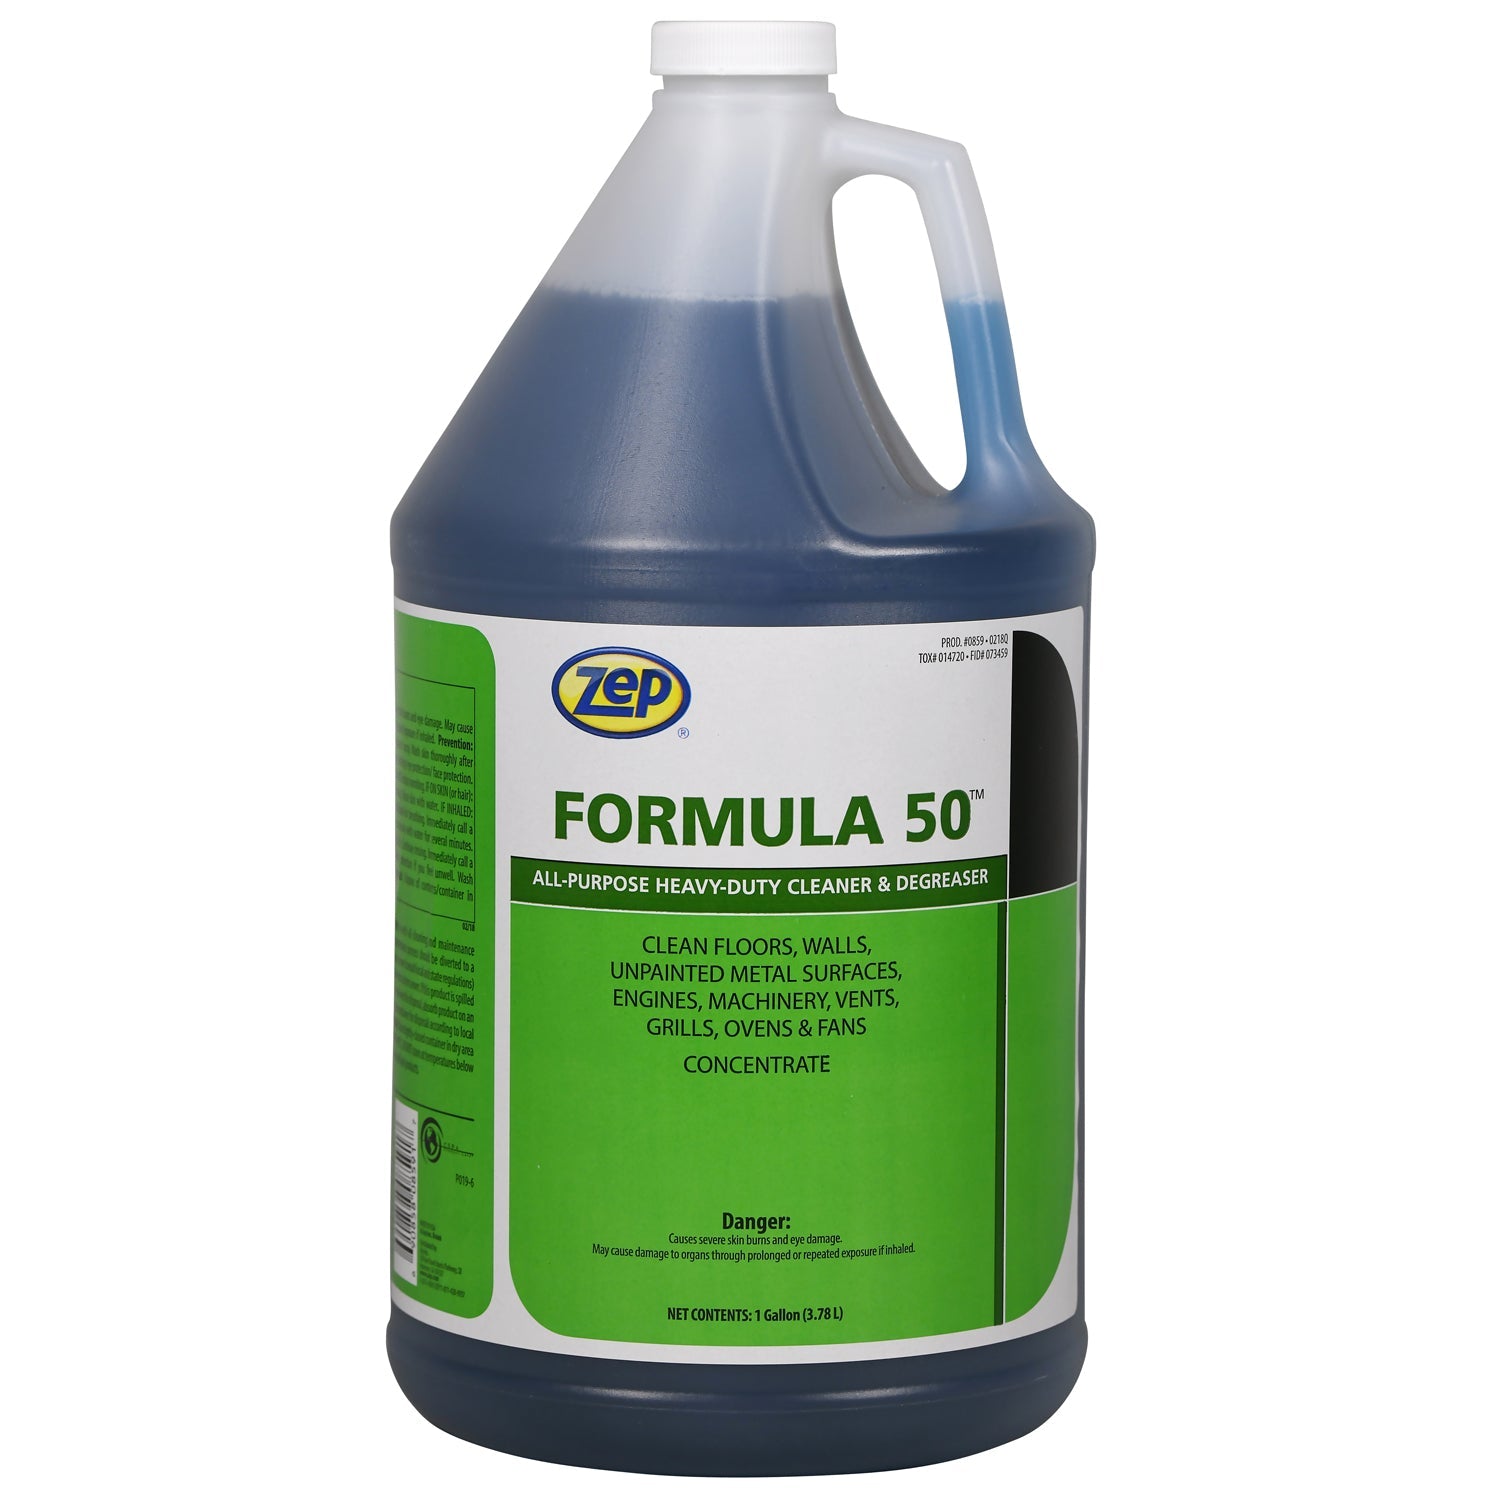 Image for Formula 50 All-Purpose Heavy-Duty Cleaner & Degreaser- 1 Gallon